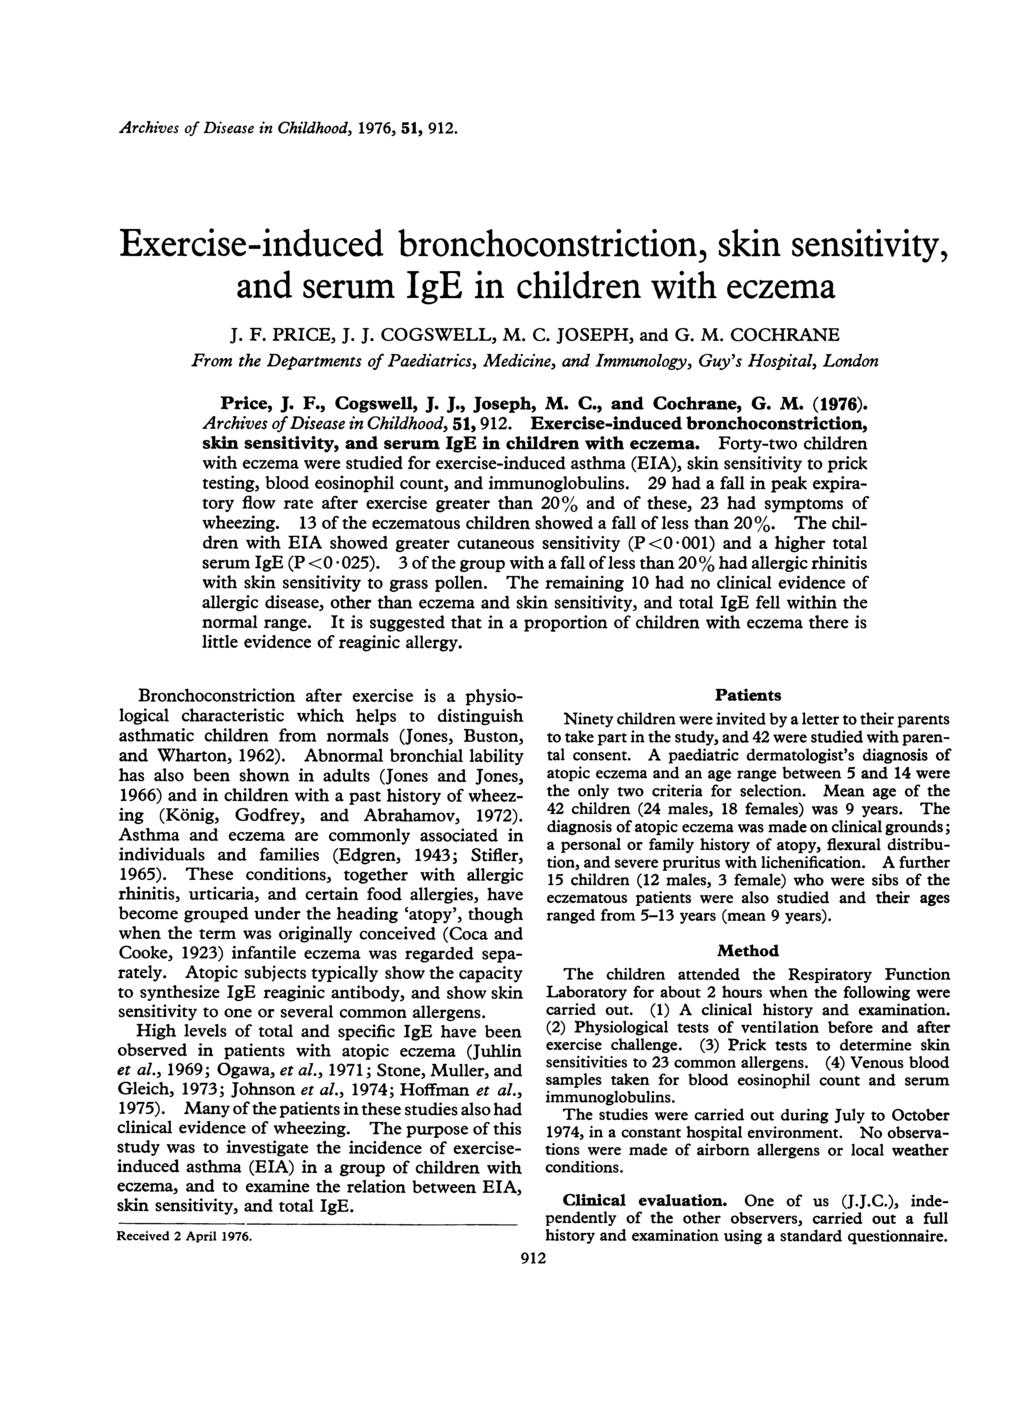 rchives of Disese in Childhood, 1976, 51, 912. Exercise-induced bronchoconstriction, skin sensitivity, nd serum IgE in children with eczem J. F. PRICE, J. J. COGSWELL, M.